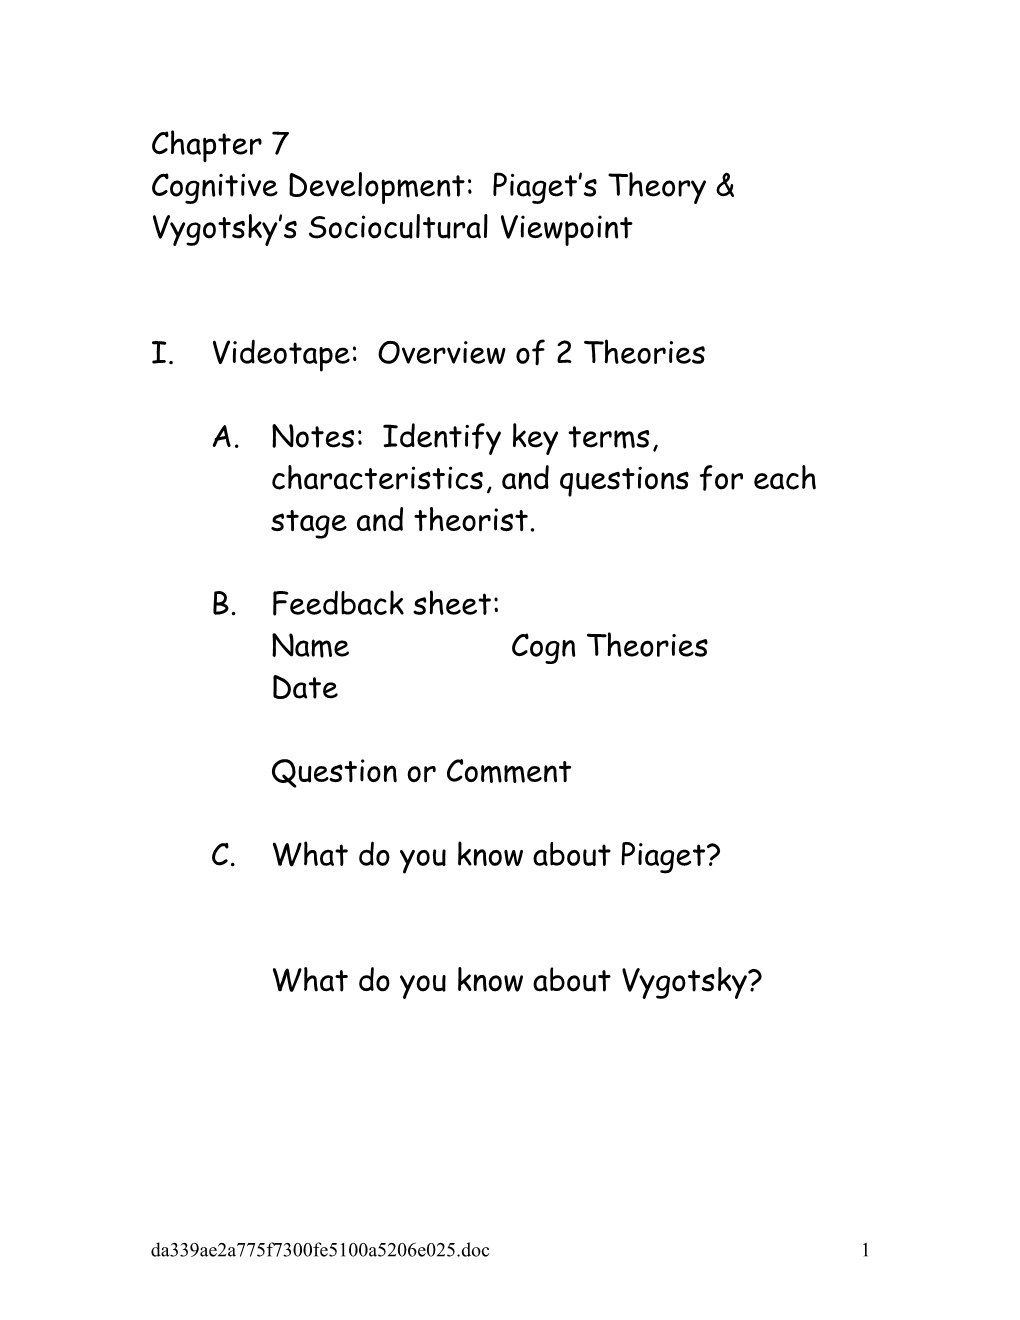 Cognitive Development: Piaget S Theory & Vygotsky S Sociocultural Viewpoint